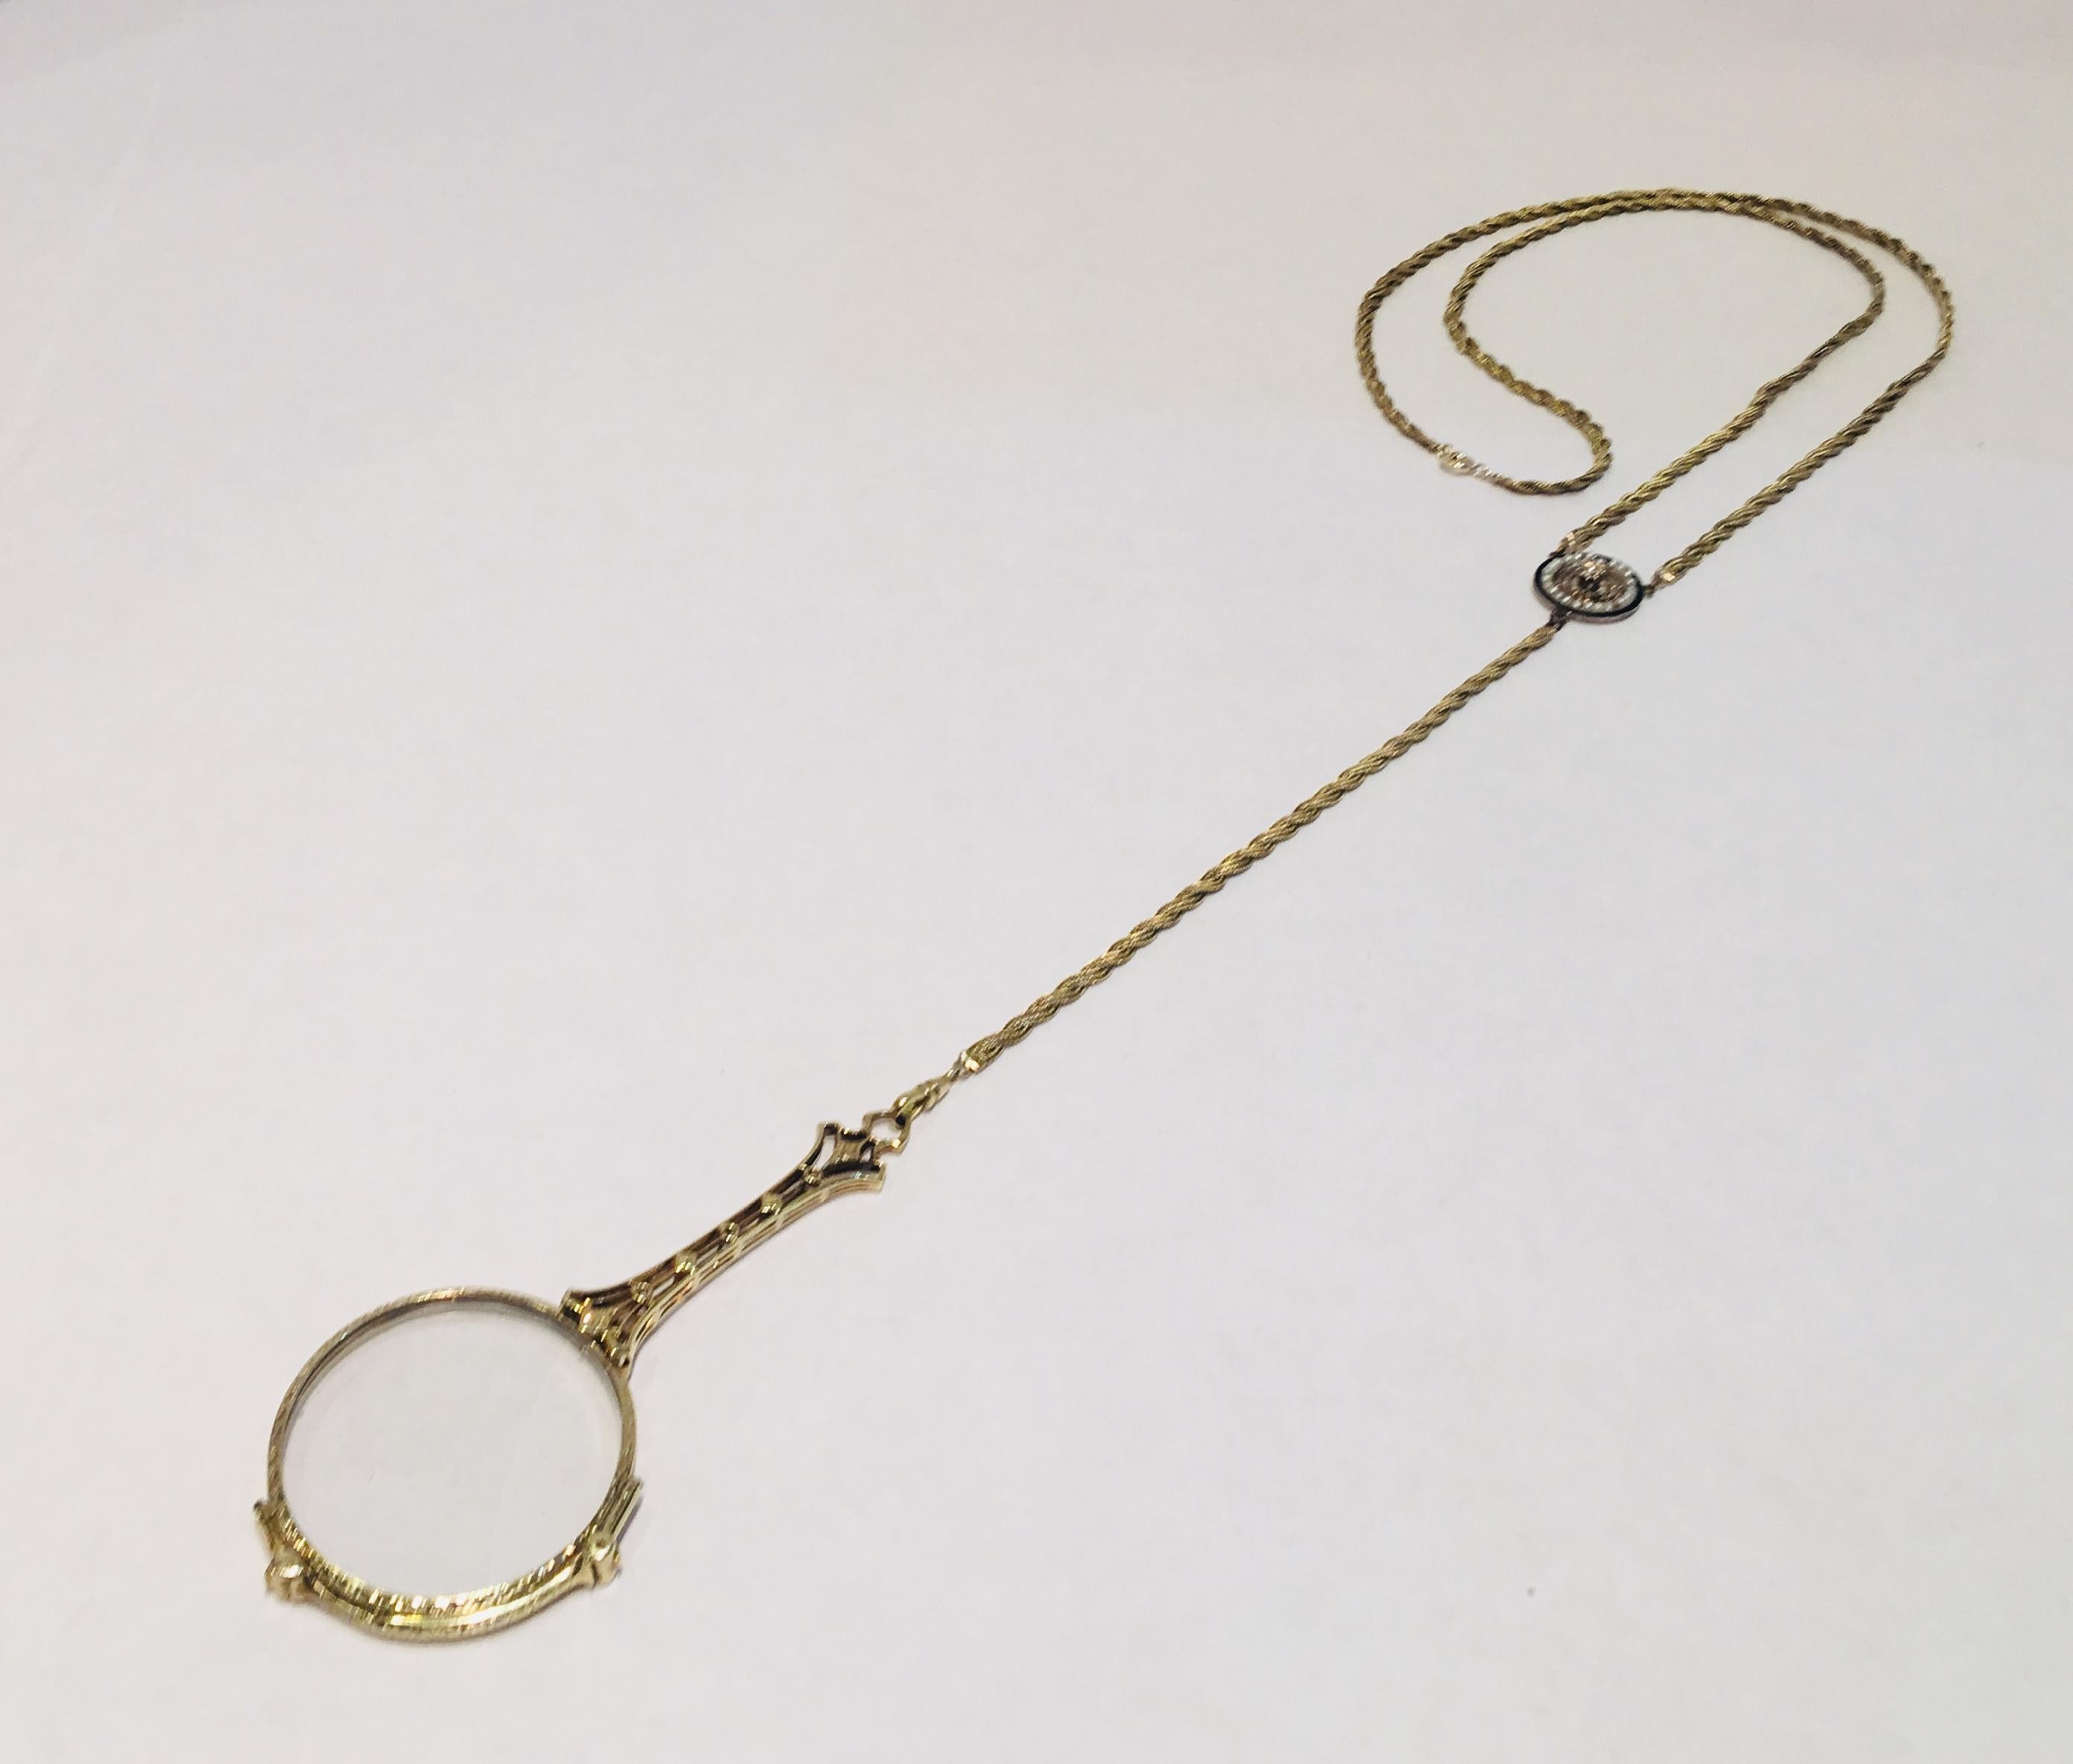 14 Karat Lorgnette Folding Eyeglasses with Gold, Diamond and Seed Pearls Lariat For Sale 2